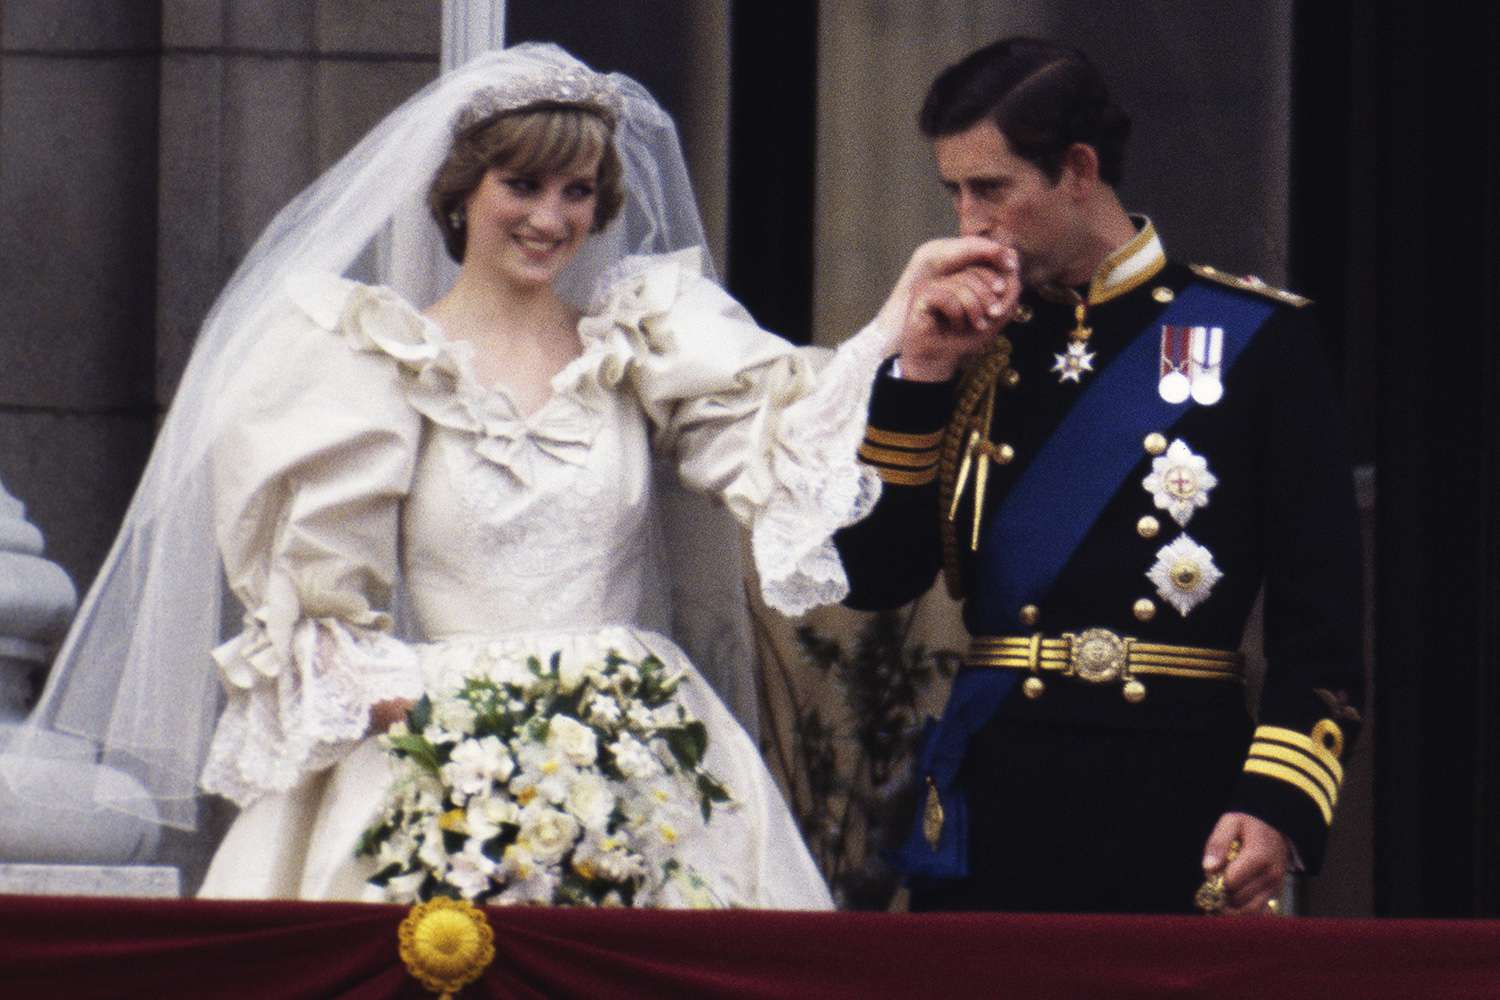 wedding of charles, prince of wales, and lady diana spencer